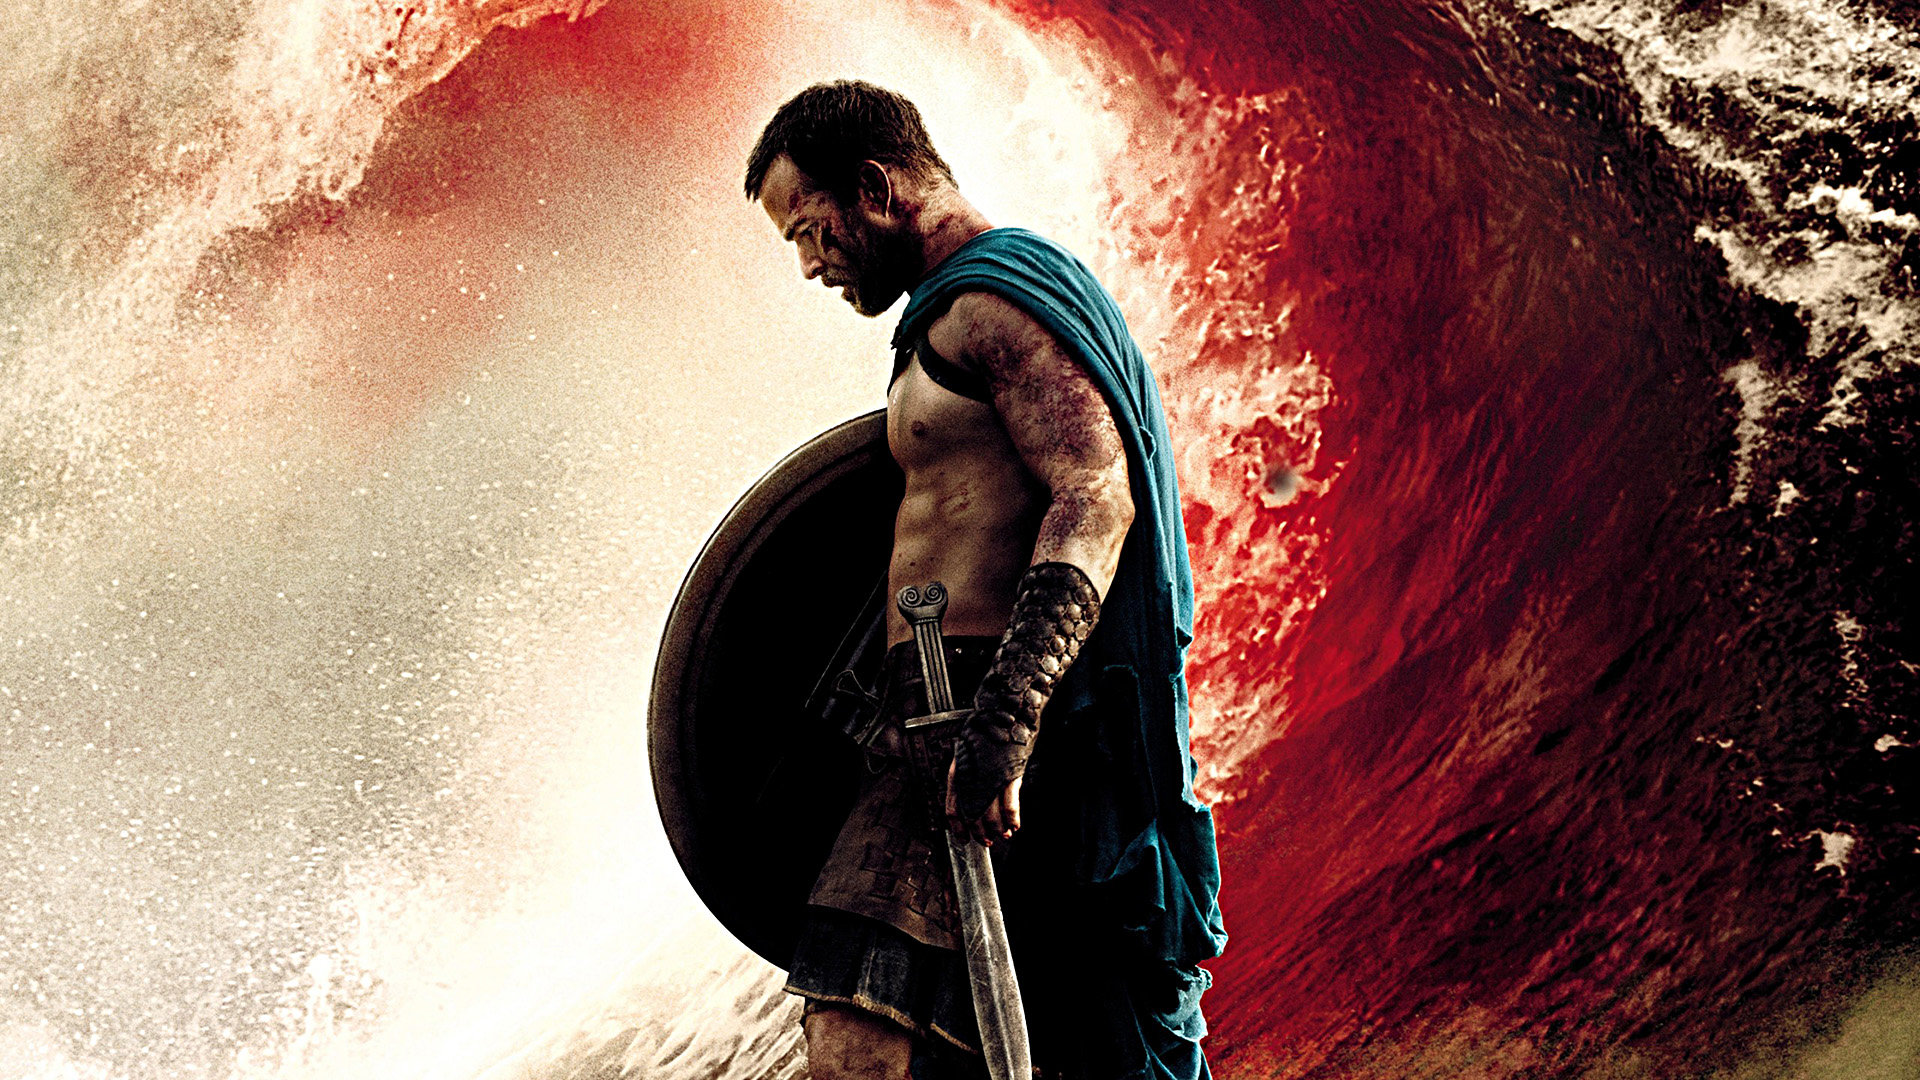 Best 300: Rise Of An Empire wallpaper ID:357803 for High Resolution full hd 1920x1080 PC